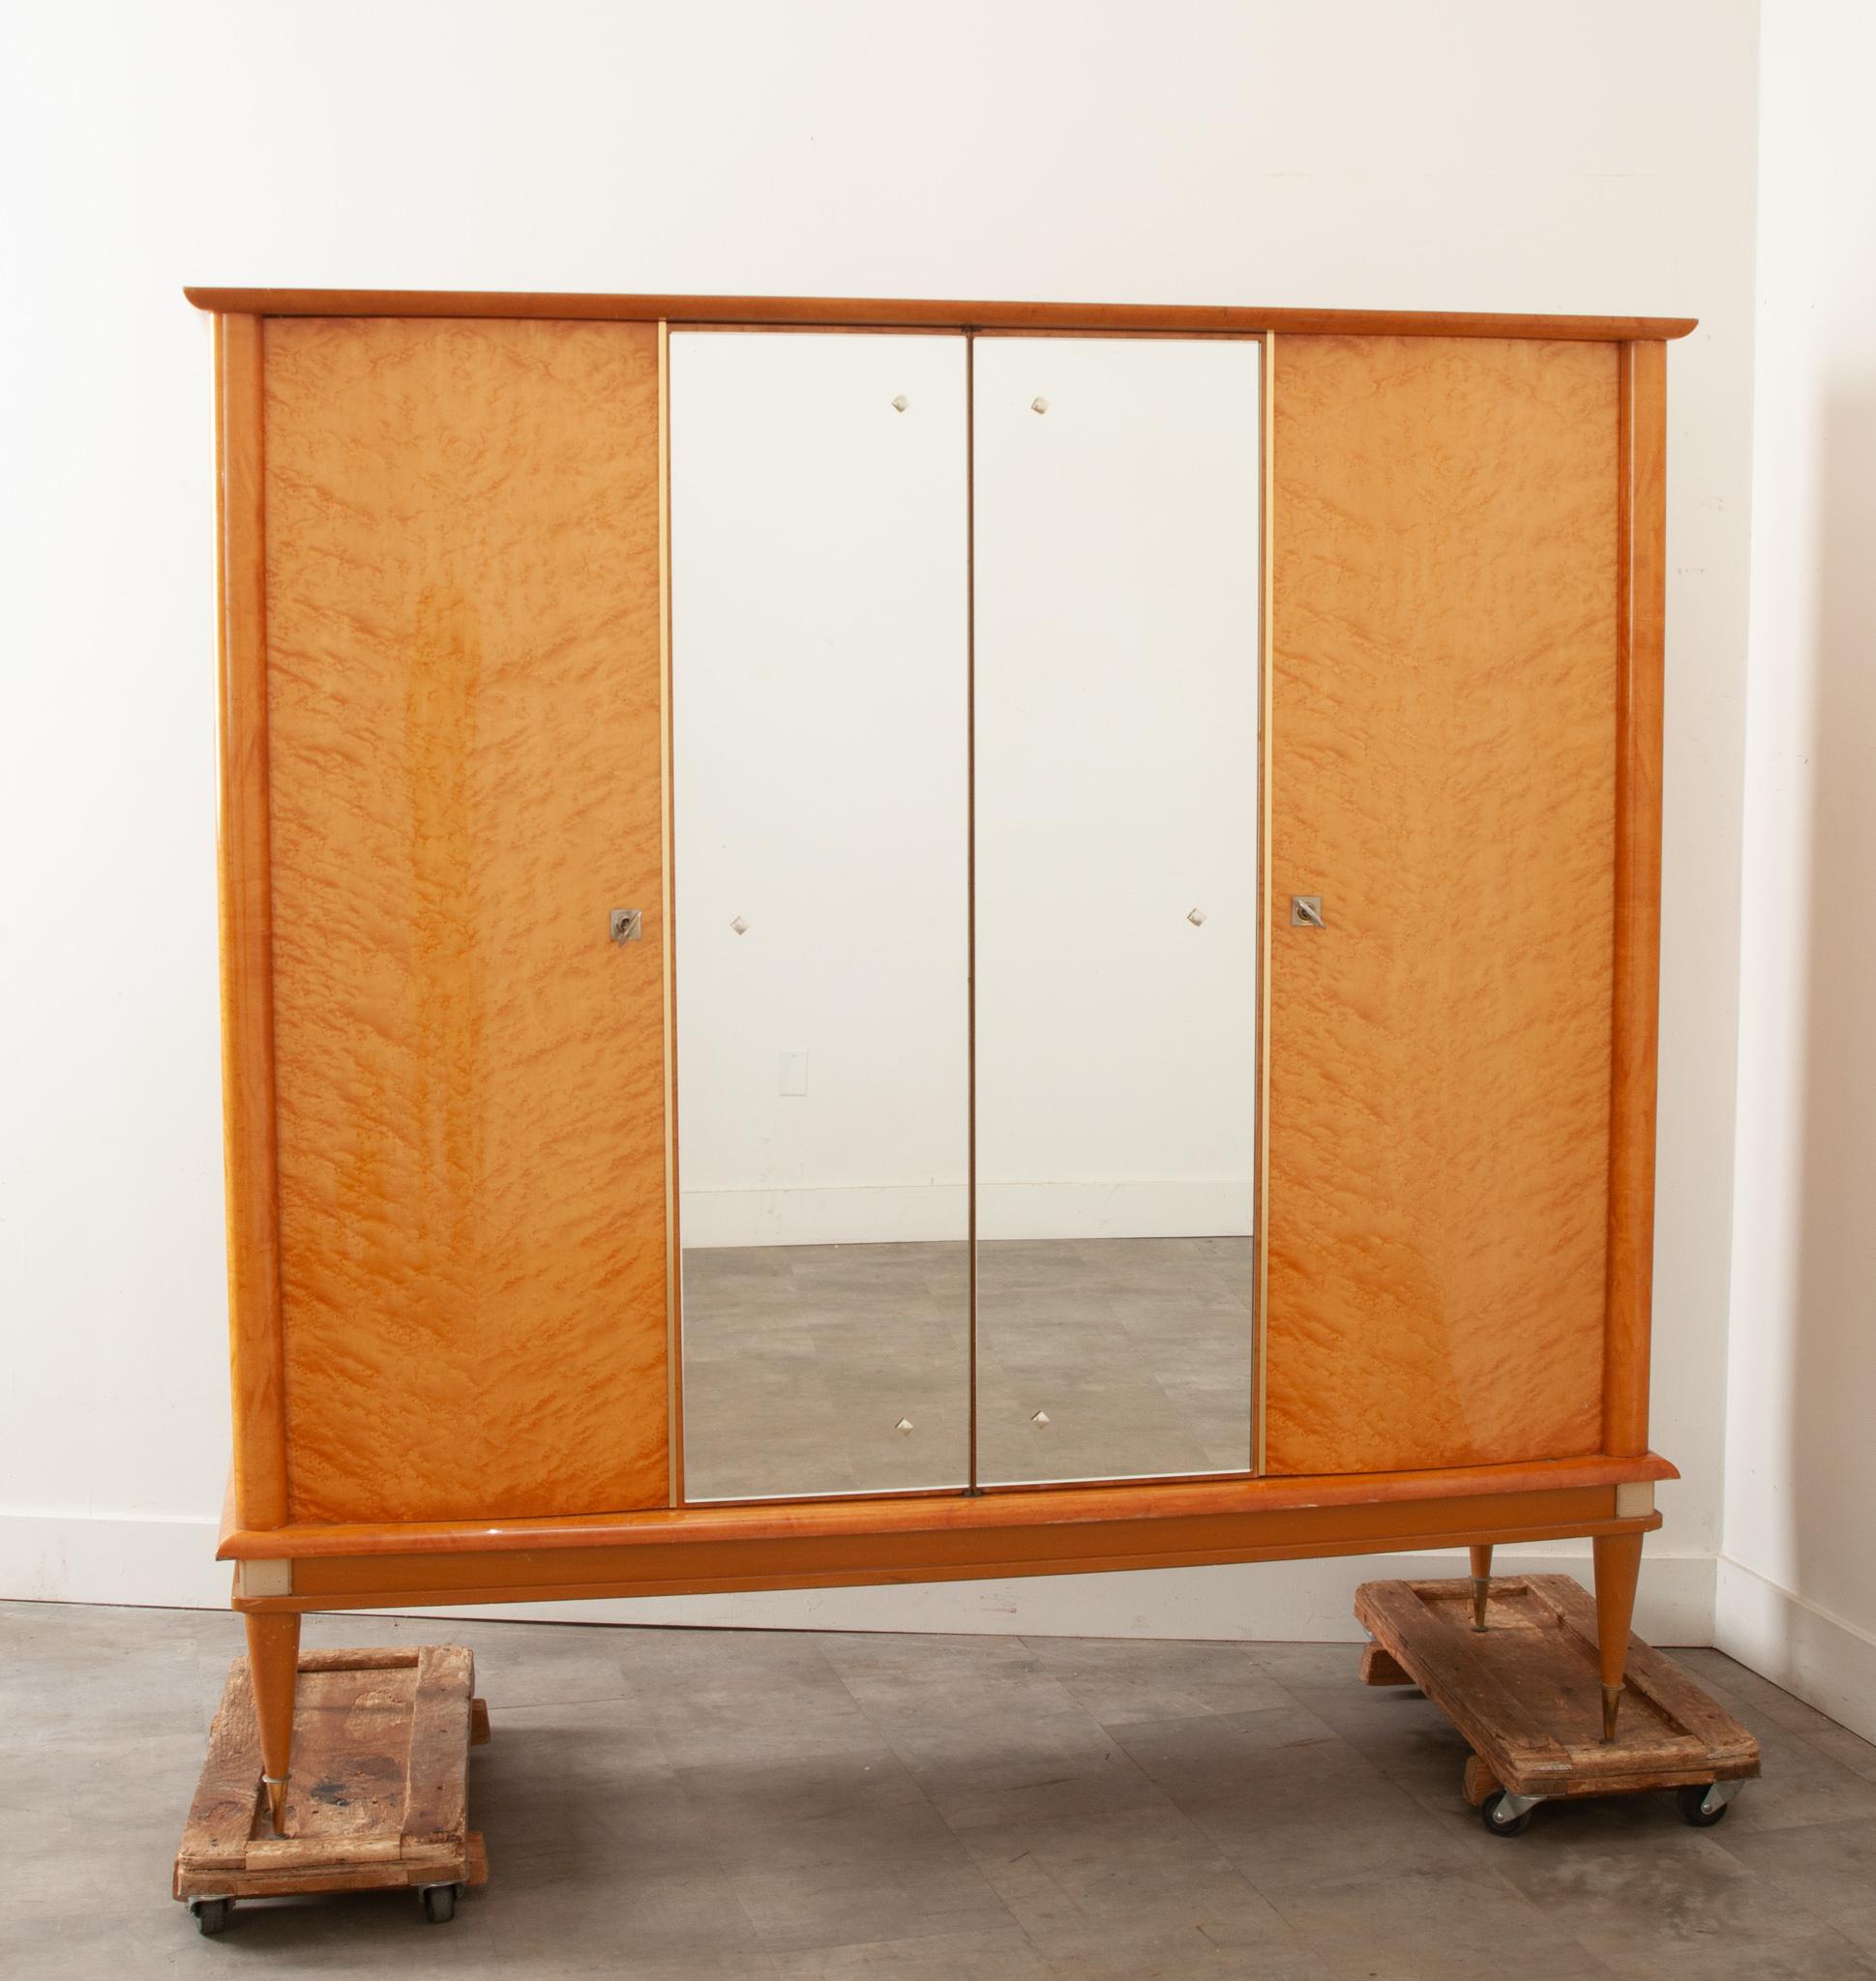 A large dressing armoire produced by Ameublement N.F. “Meubles” in France in the 1950’s /1960’s (label found inside the right door) This sleek mid century modern cabinet would work well in a bedroom or serve as a bar. The exterior of the cabinet is